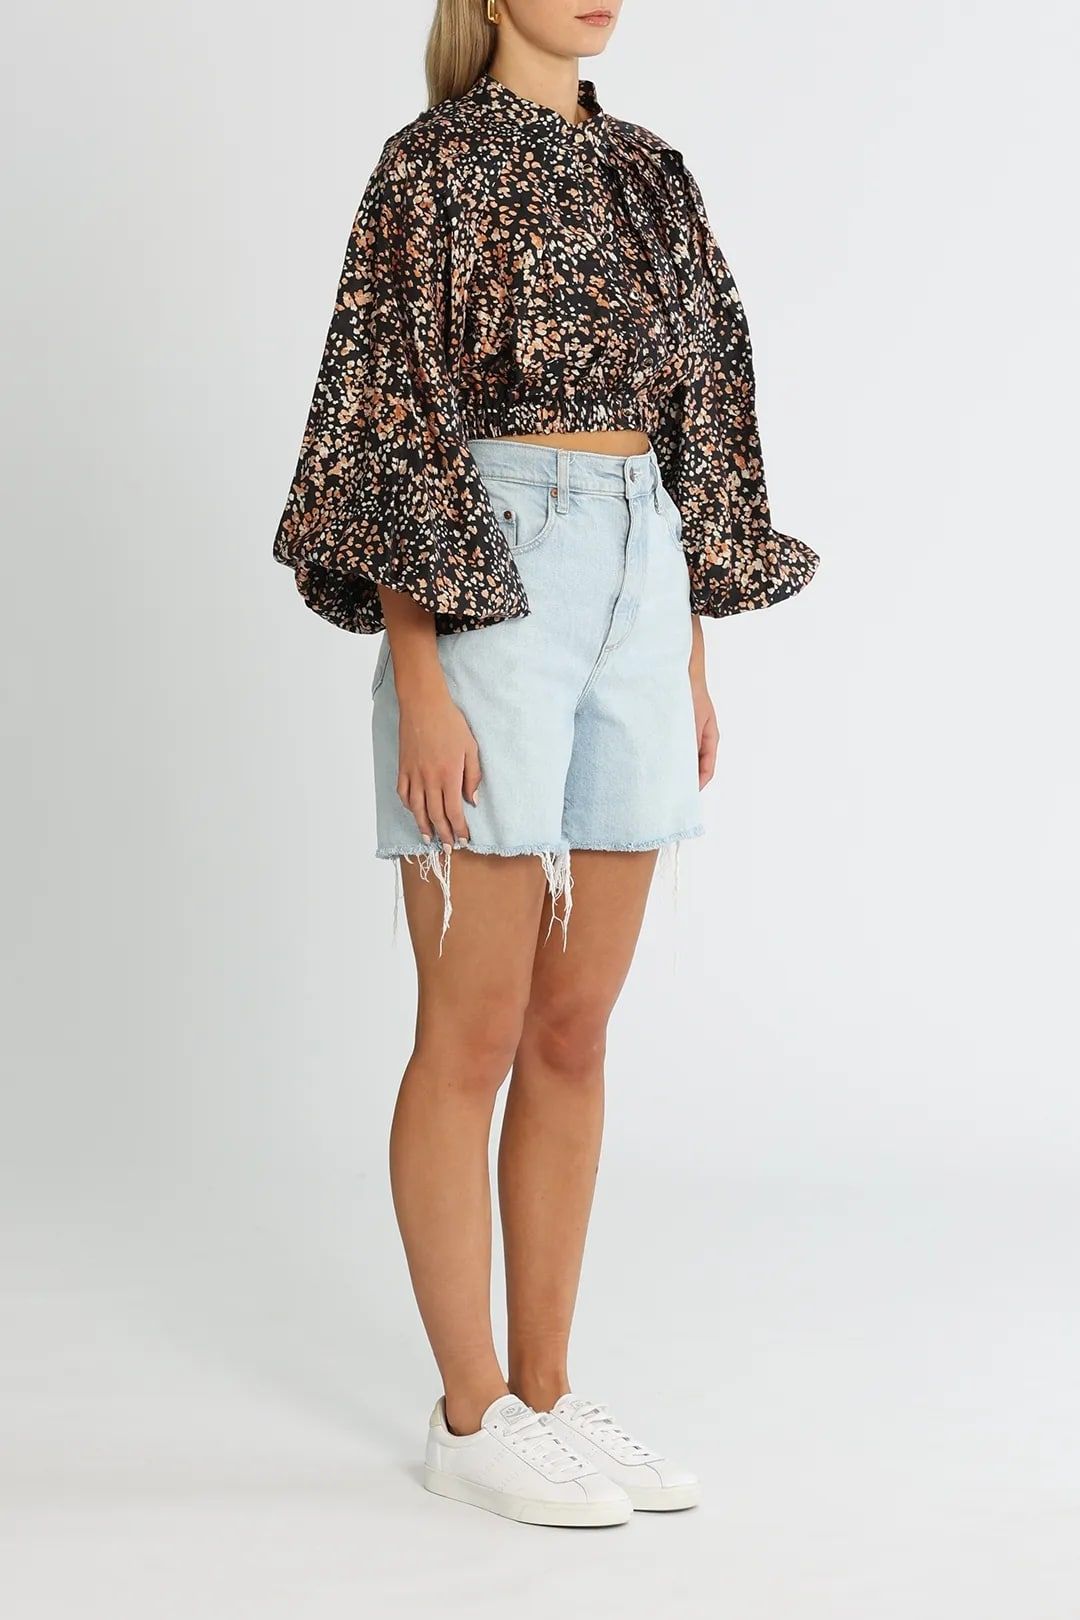 Rent the Winrose Top in Wild Spot by Acler for parties